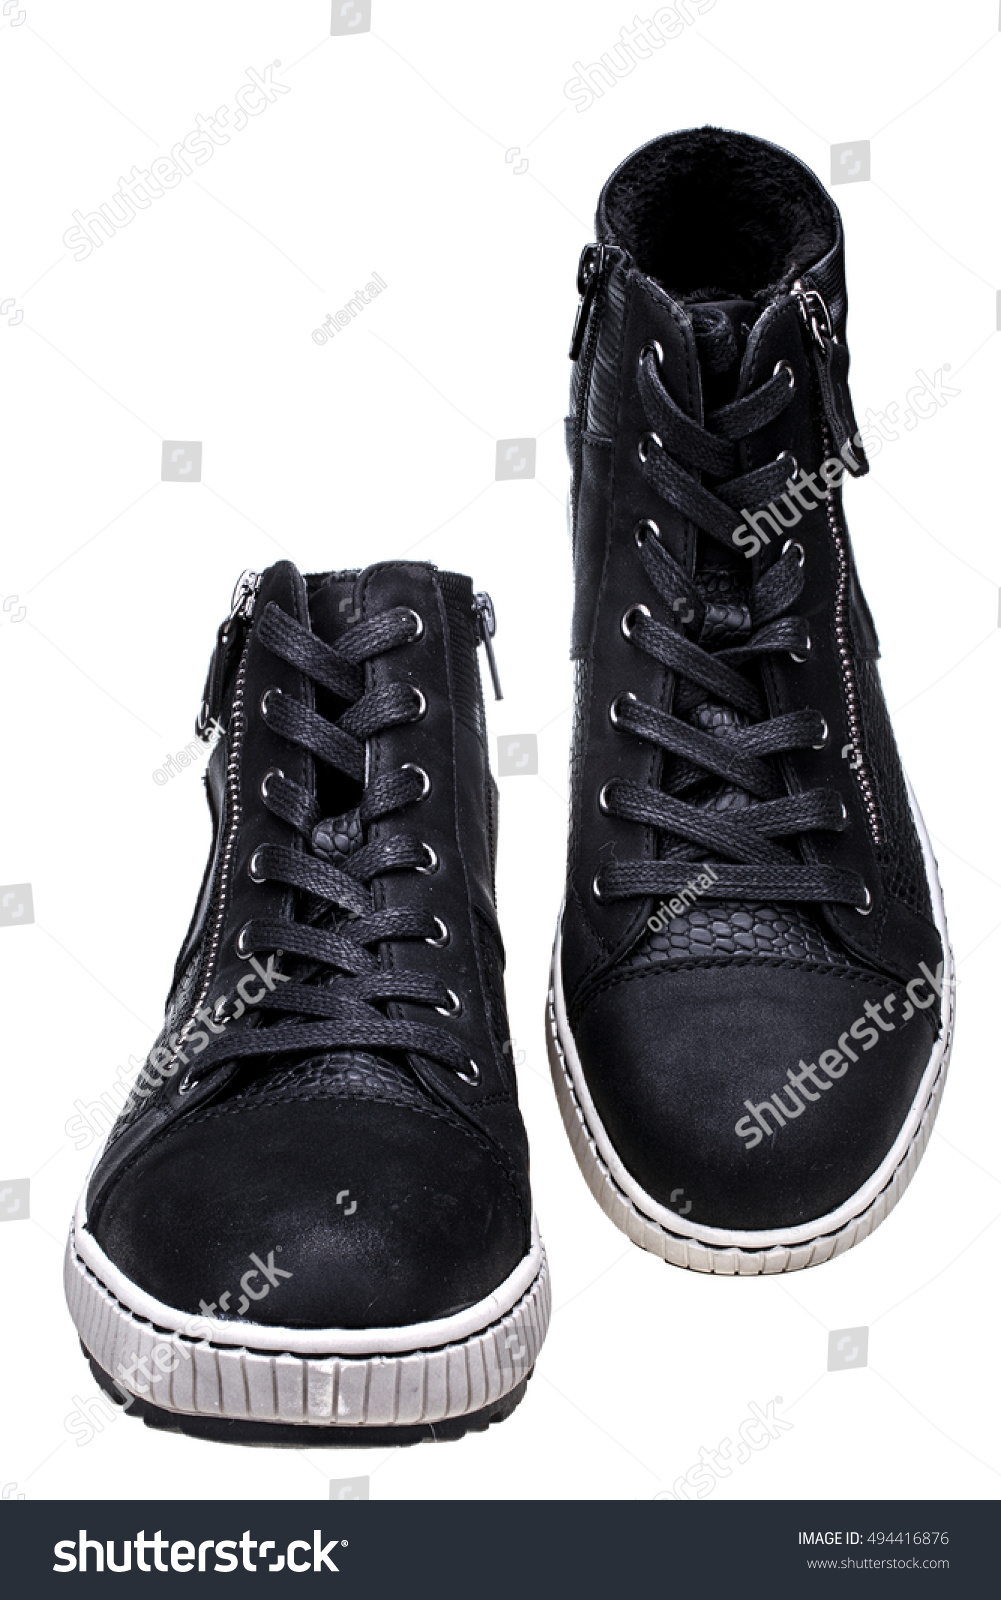 fake leather sneakers